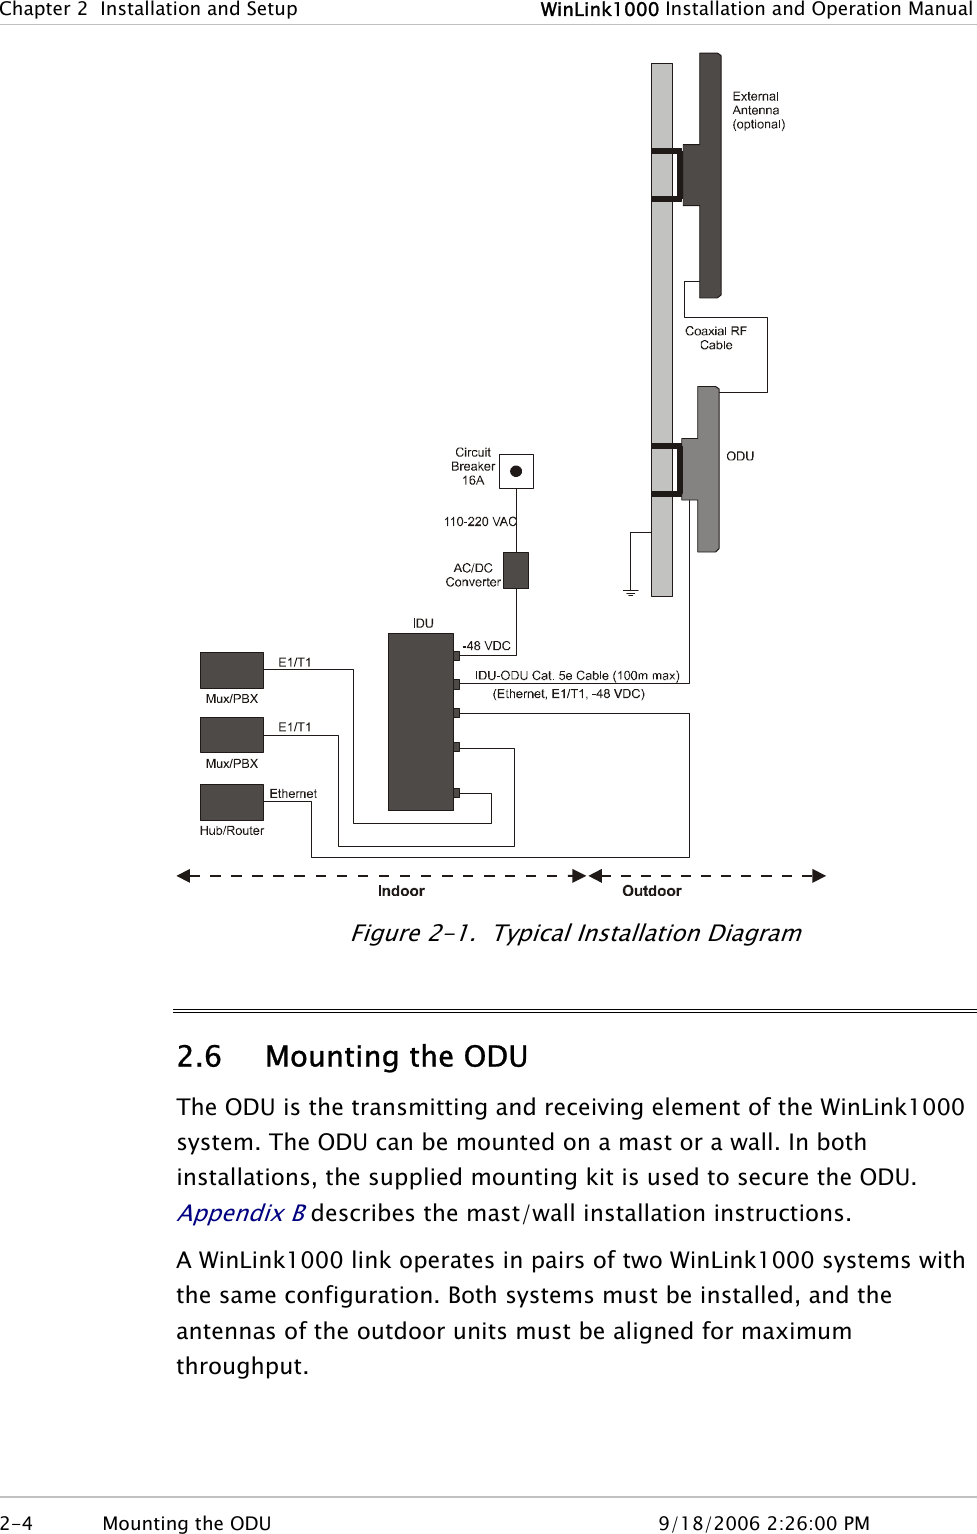 Chapter  2  Installation and Setup  WinLink1000 Installation and Operation Manual  Figure  2-1.  Typical Installation Diagram 2.6 Mounting the ODU The ODU is the transmitting and receiving element of the WinLink1000 system. The ODU can be mounted on a mast or a wall. In both installations, the supplied mounting kit is used to secure the ODU. Appendix B describes the mast/wall installation instructions. A WinLink1000 link operates in pairs of two WinLink1000 systems with the same configuration. Both systems must be installed, and the antennas of the outdoor units must be aligned for maximum throughput. 2-4  Mounting the ODU  9/18/2006 2:26:00 PM 